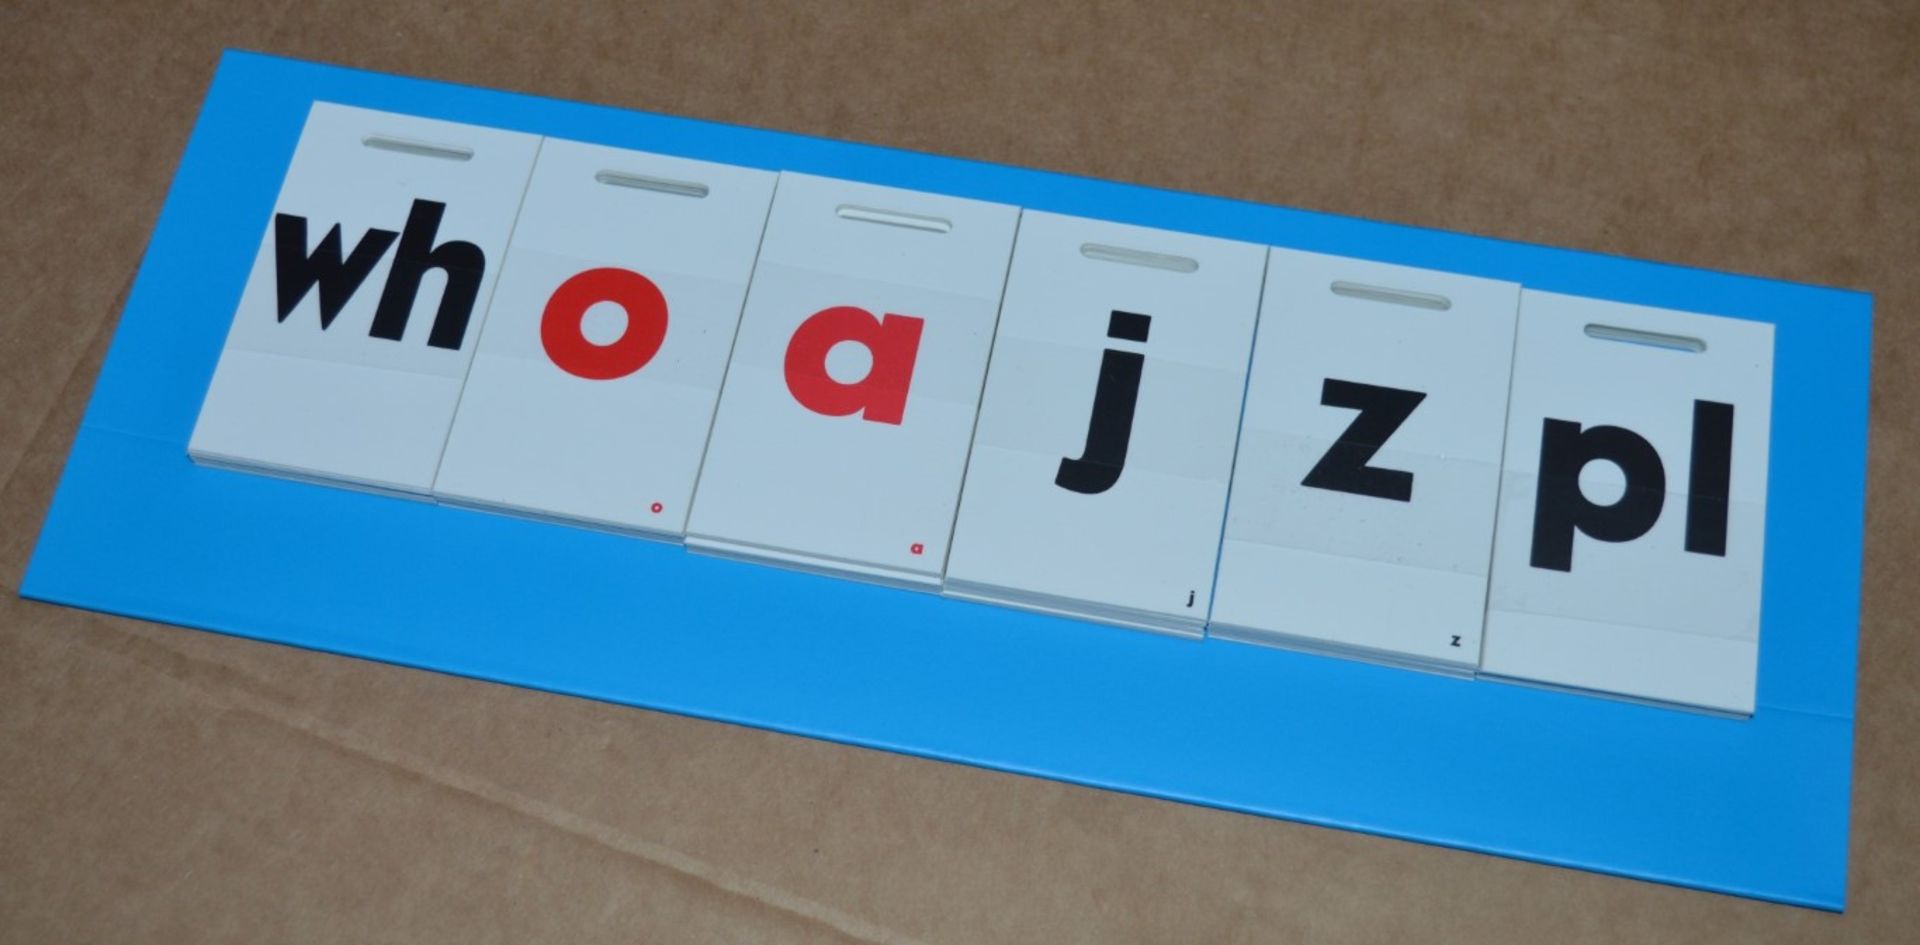 36 x Galt Educational WORDS FLIP CARDS With Stands - WORD BUILDER - For Educational Purposes - Ideal - Image 3 of 6